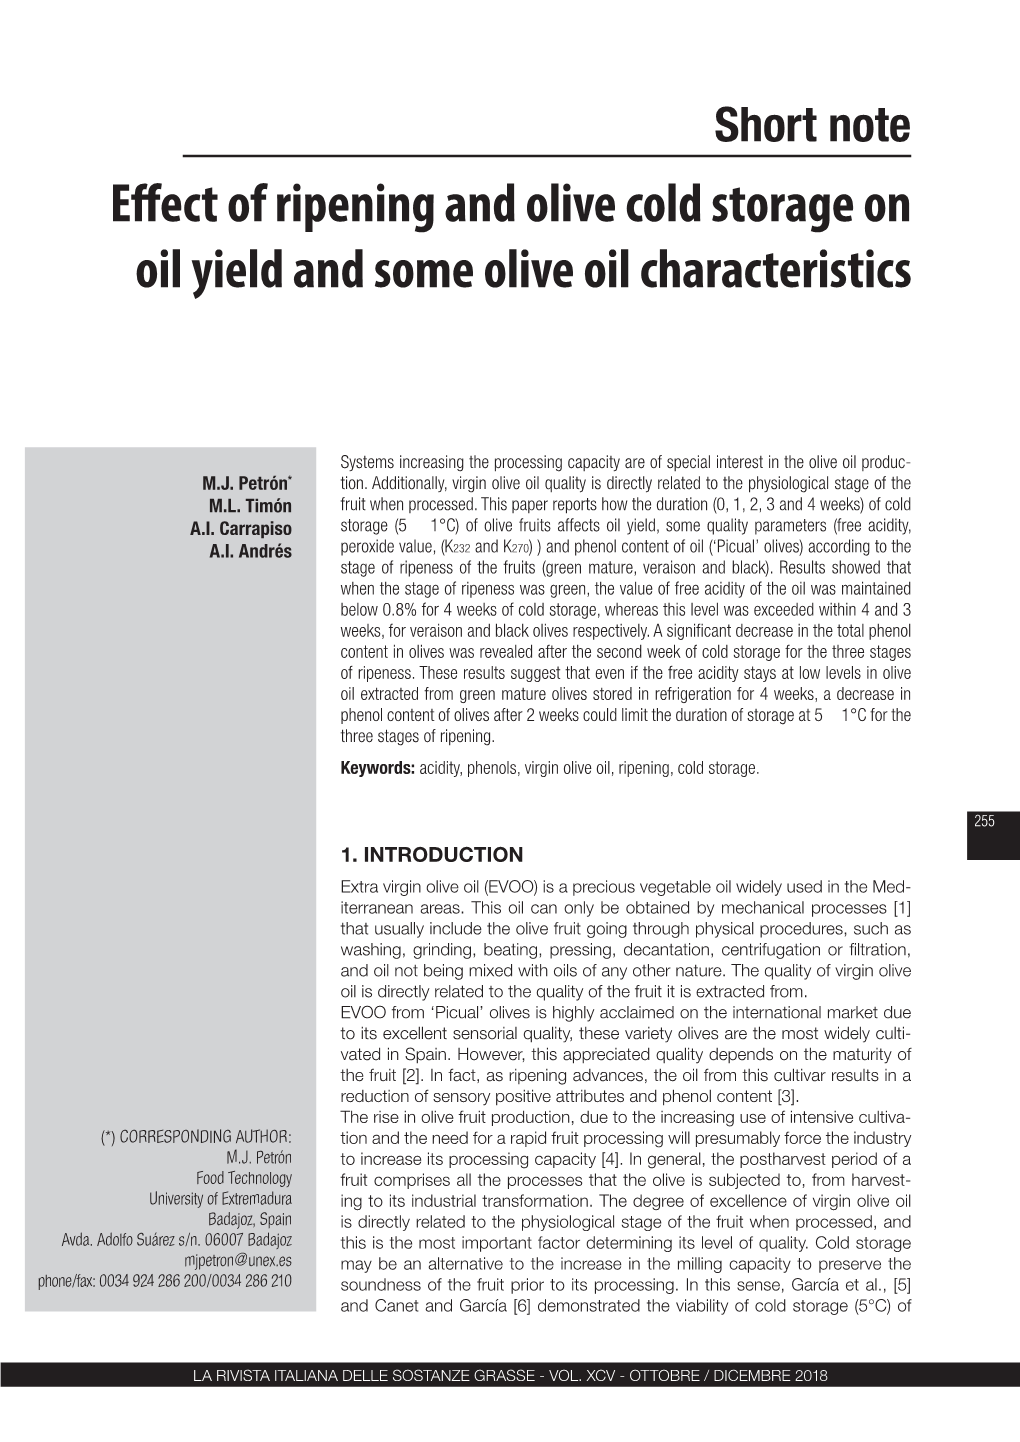 Effect of Ripening and Olive Cold Storage on Oil Yield and Some Olive Oil Characteristics